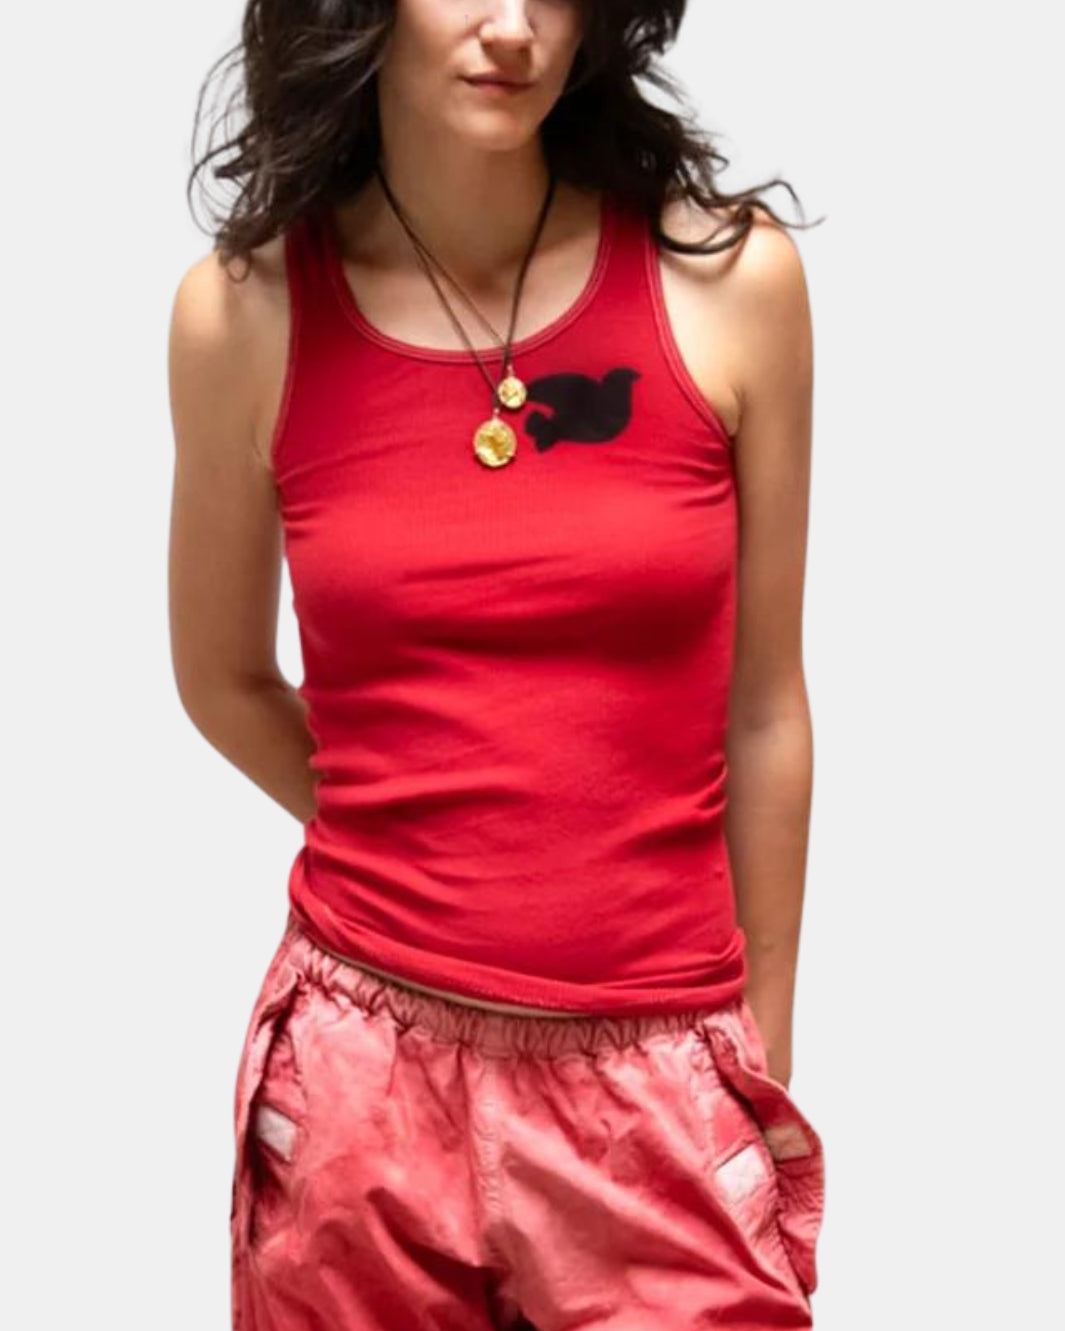 SUPERVINTAGE TANK IN ARTYARD RED - Romi Boutique